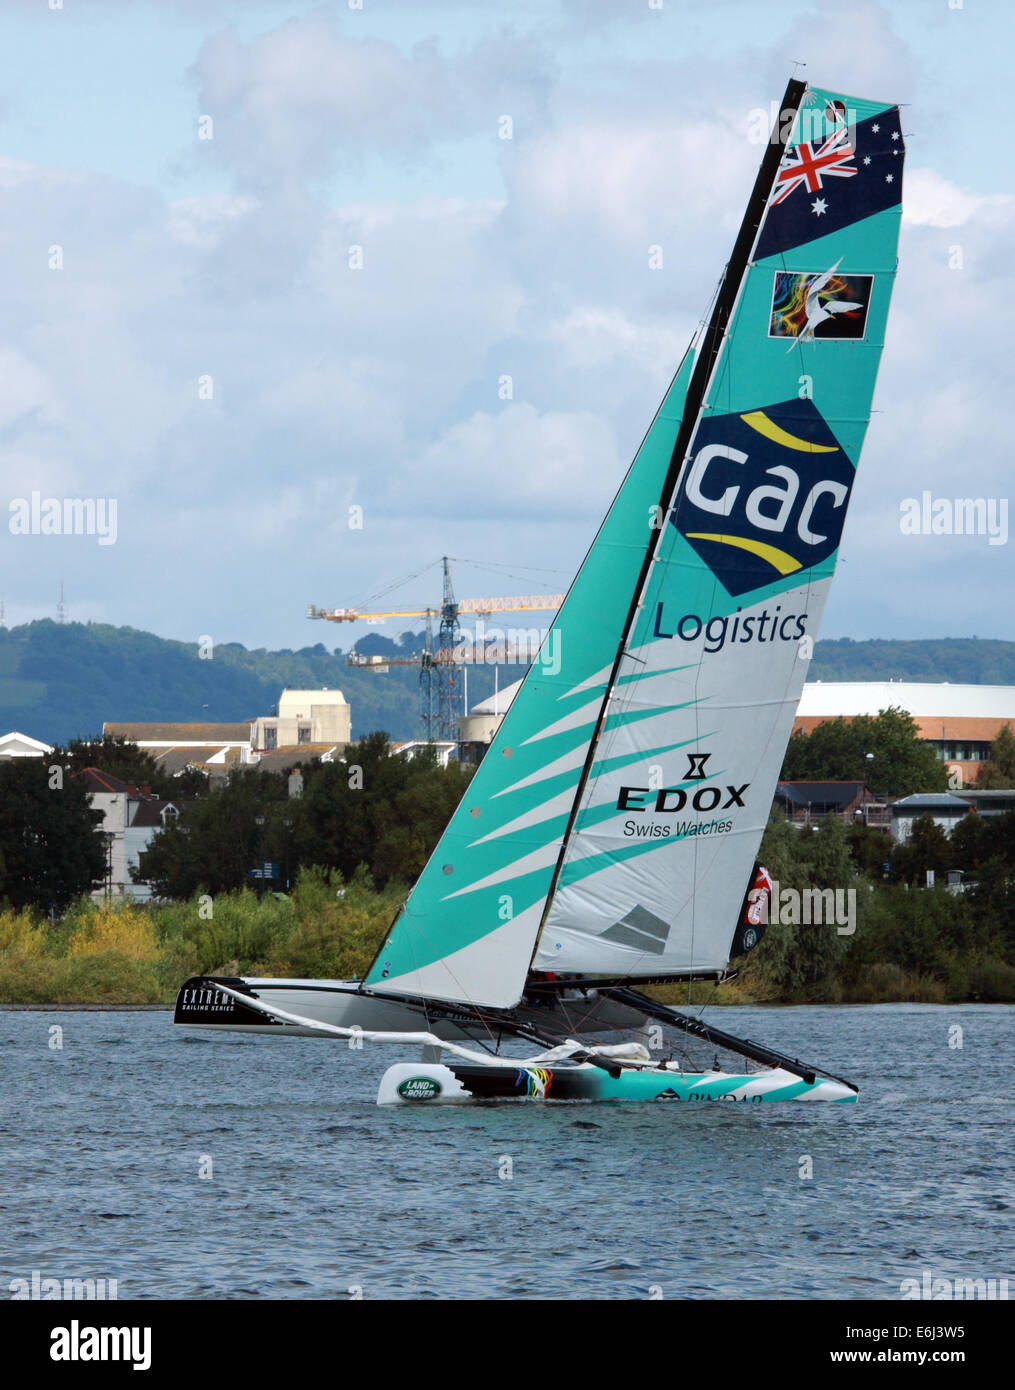 Catamarans taking part in Extreme sailing event in Cardiff Bay, 23rd August 2014 Stock Photo